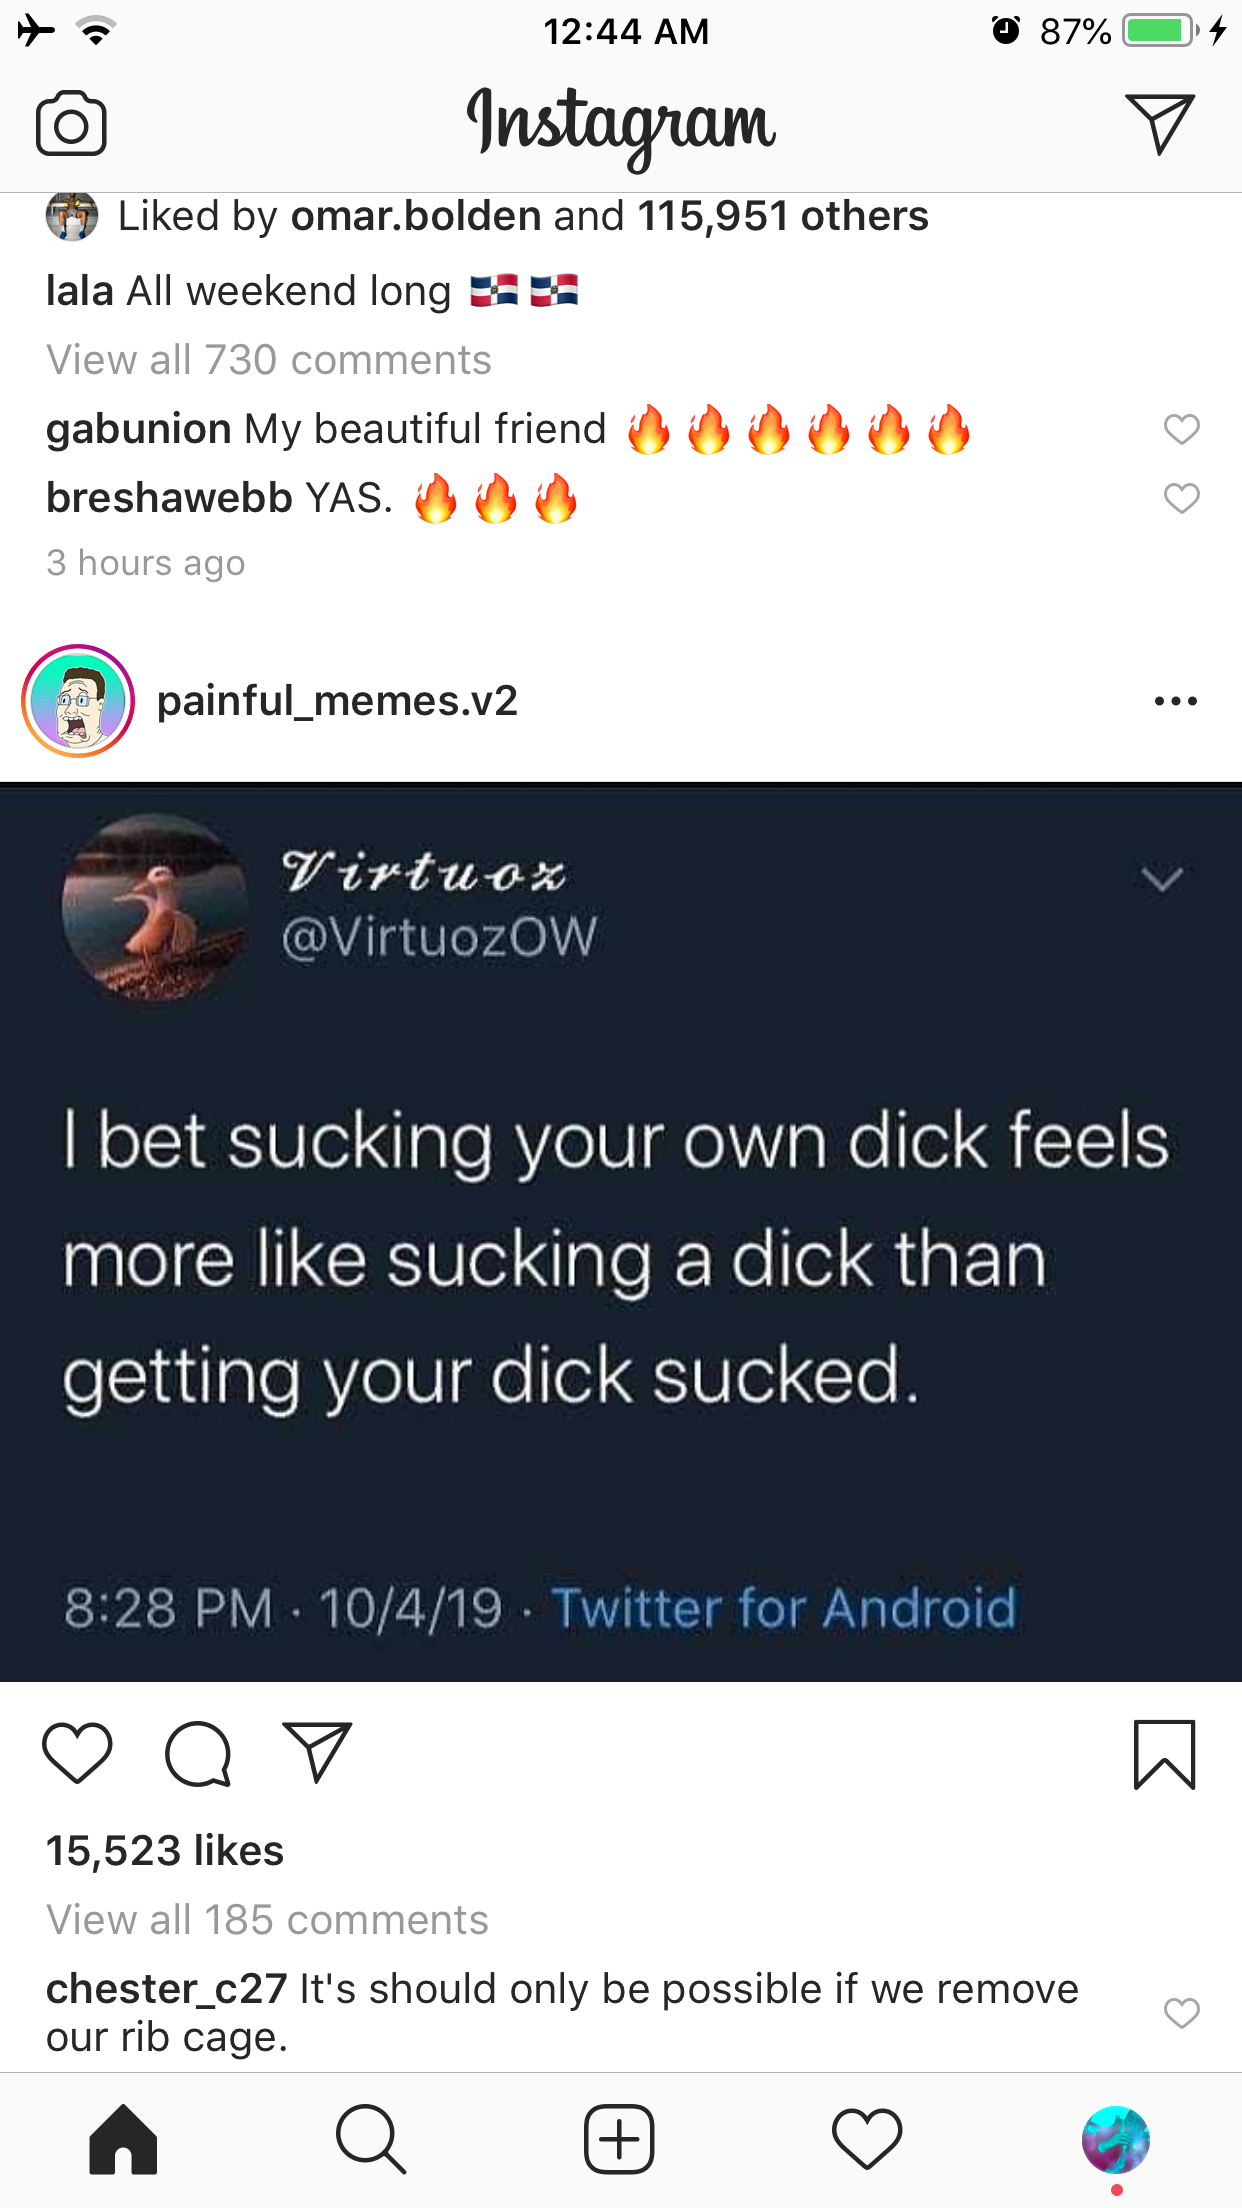 87% Instagram d by omar.bolden and 115,951 others lala All weekend long as View all 730 gabunion My beautiful friend breshawebb Yas. 2 hours ago 2 painful_memes.v2 Virtuox I bet sucking your own dick feels more sucking a dick than getting your dick sucked